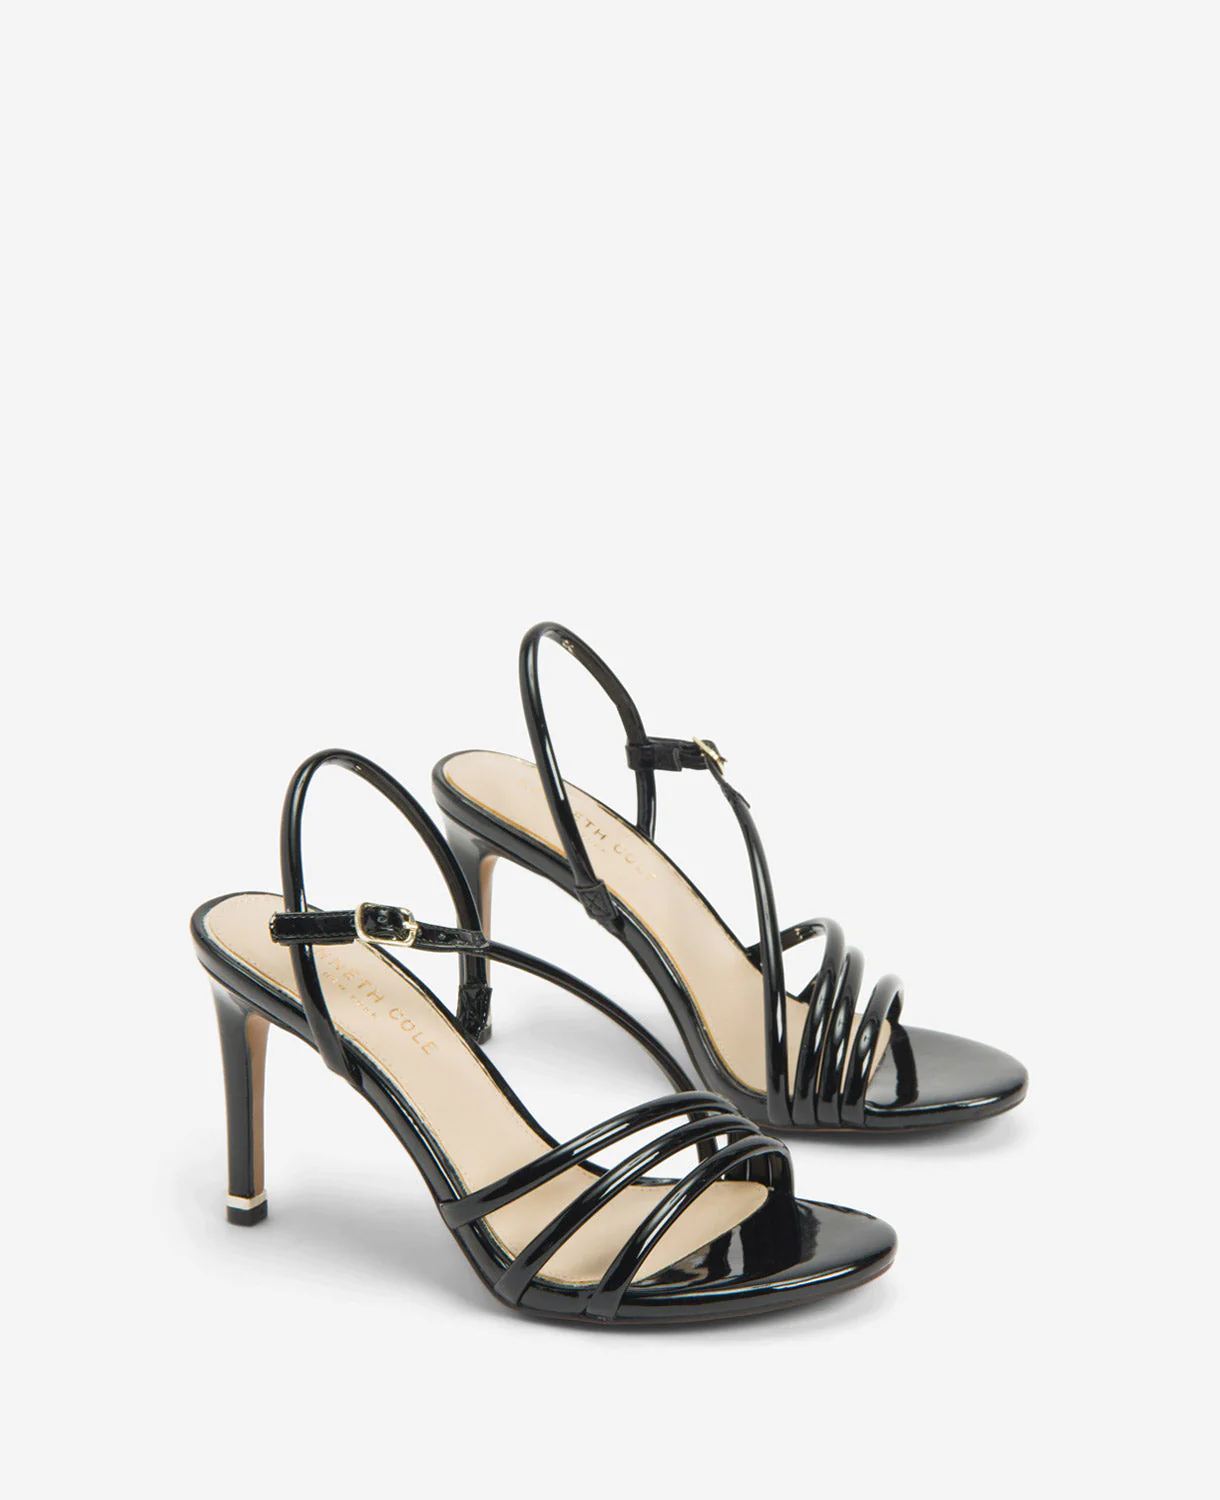 Kennethcole | Baxley Patent Strappy Sandals